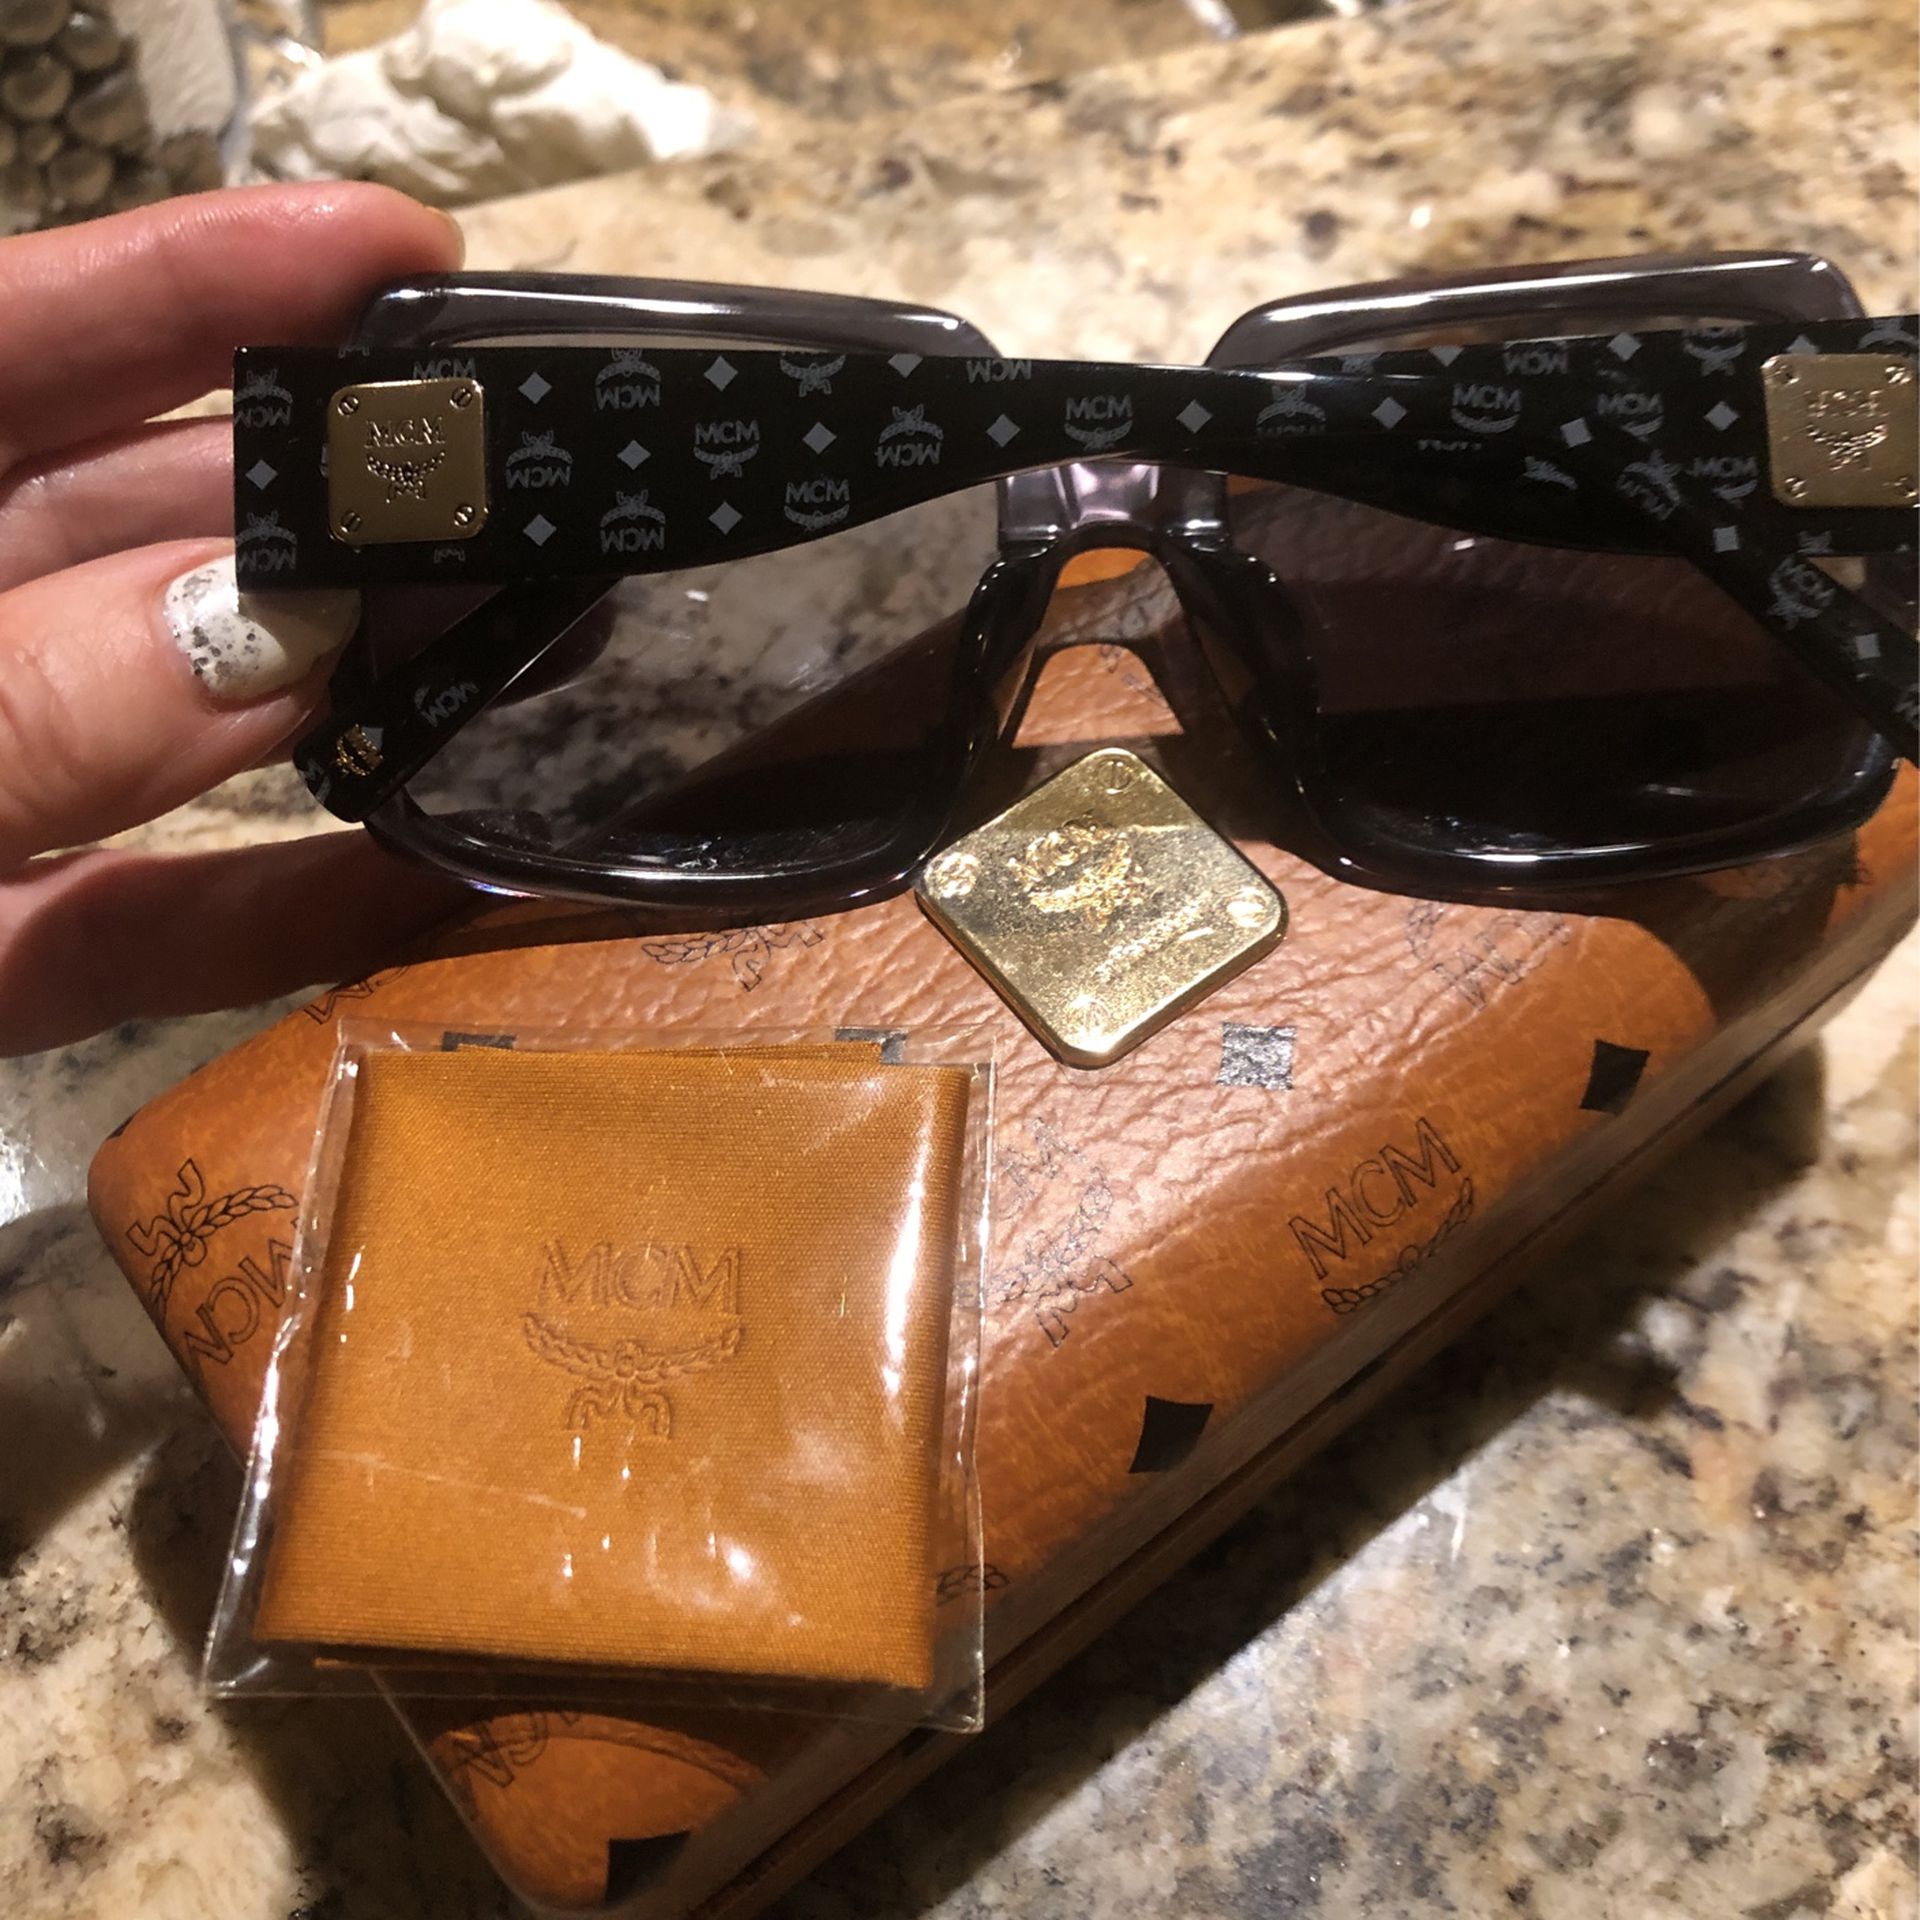 Mcm Sunglasses In A https://offerup.com/redirect/?o=Q2FzZS5OZXc=